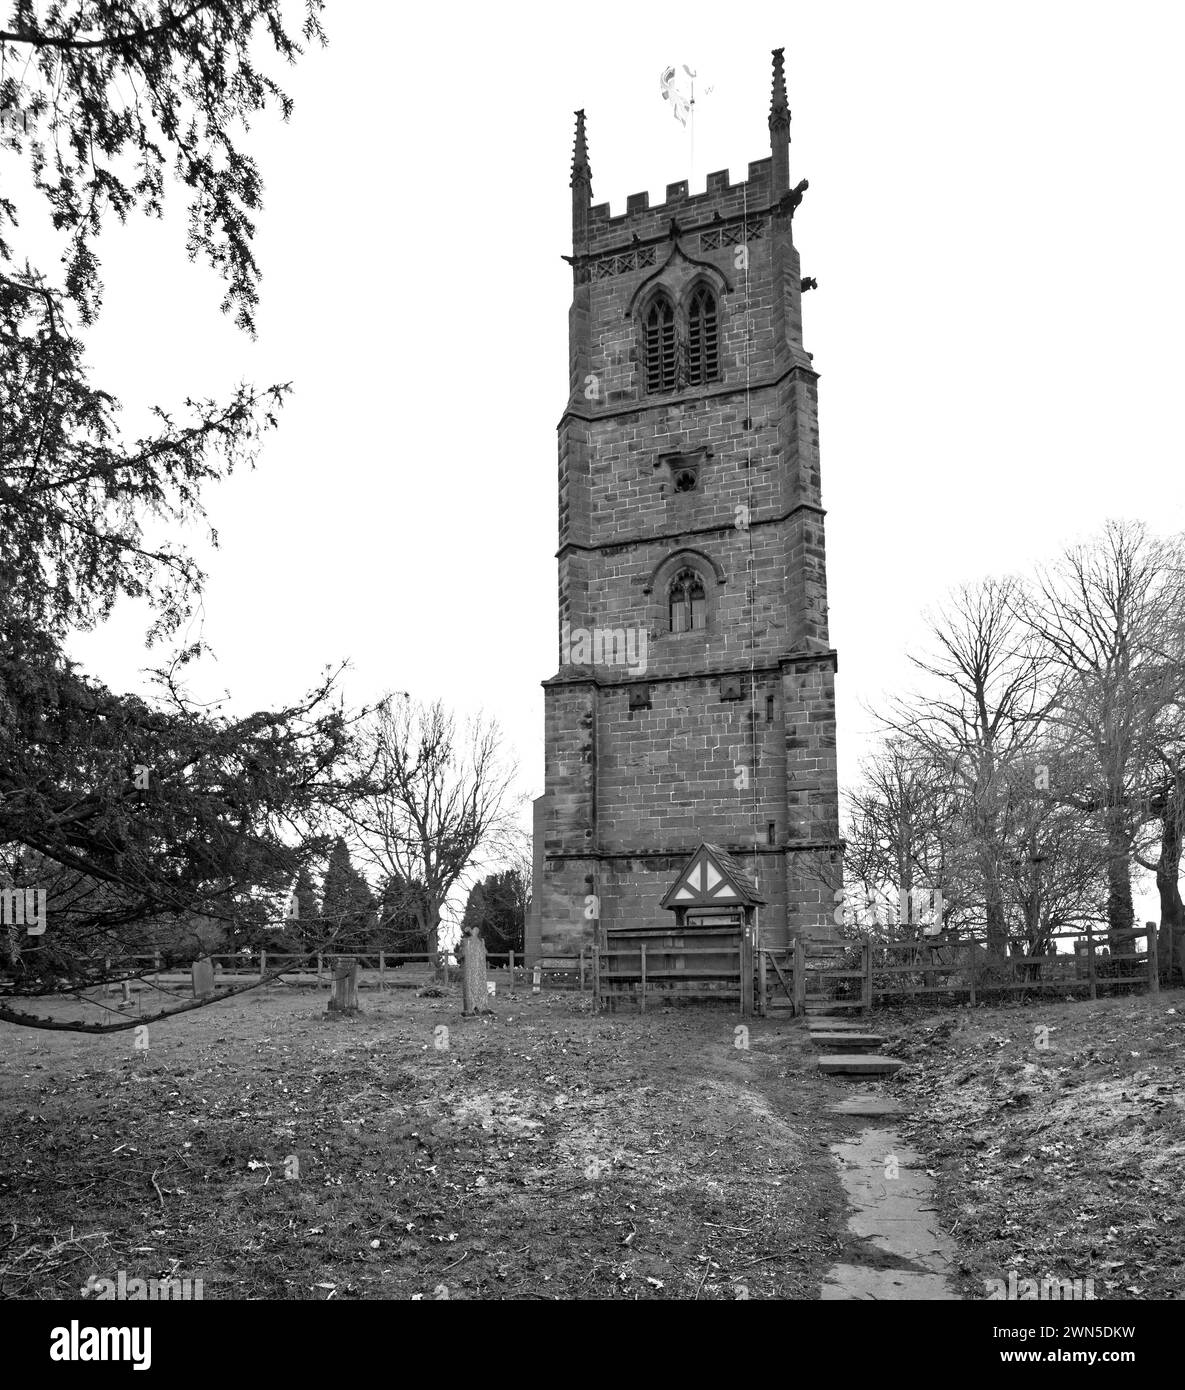 The Leaning Tower of South Cheshire at St Chad's, Gothic style Church at Wybunbury - a Grade II listed building and National Heritage Site. Stock Photo